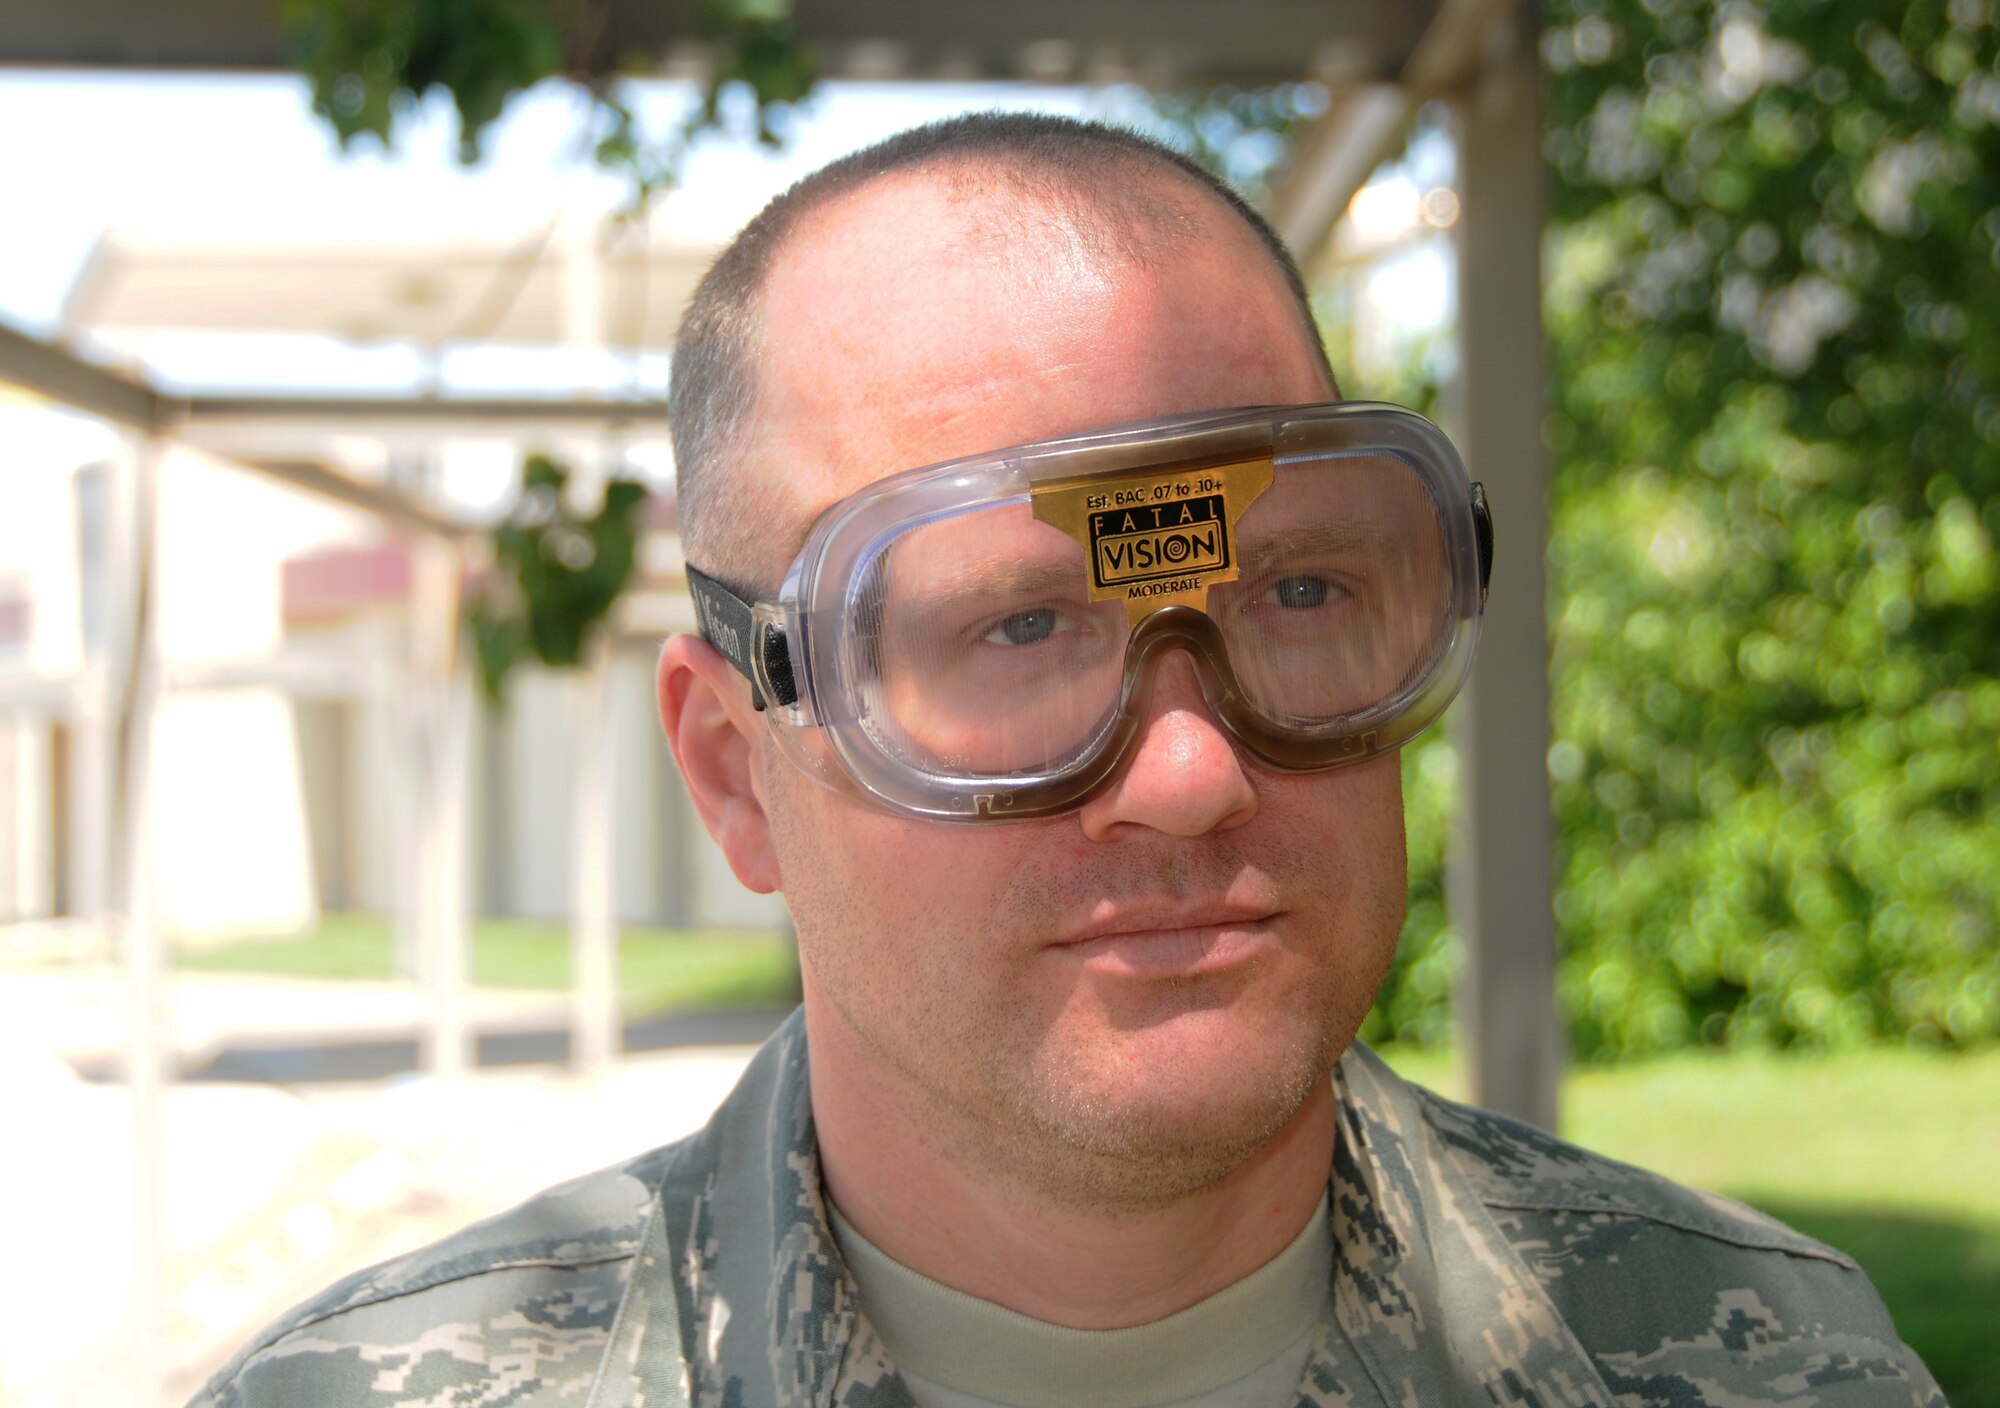 Technical Sgt. John Vincent, 188th Fighter Wing Safety Office, demonstrates the vision distorting effects of the drunk driving simulator goggles during the wing's Alcohol Abuse Awareness Day, May 12, 2013. More than 90 Airmen took part in the event, which featured the simulator, guest speakers and a video presentation. (U. S. Air National Guard photo by Senior Airman John Hillier/188thFighter Wing Public Affairs)